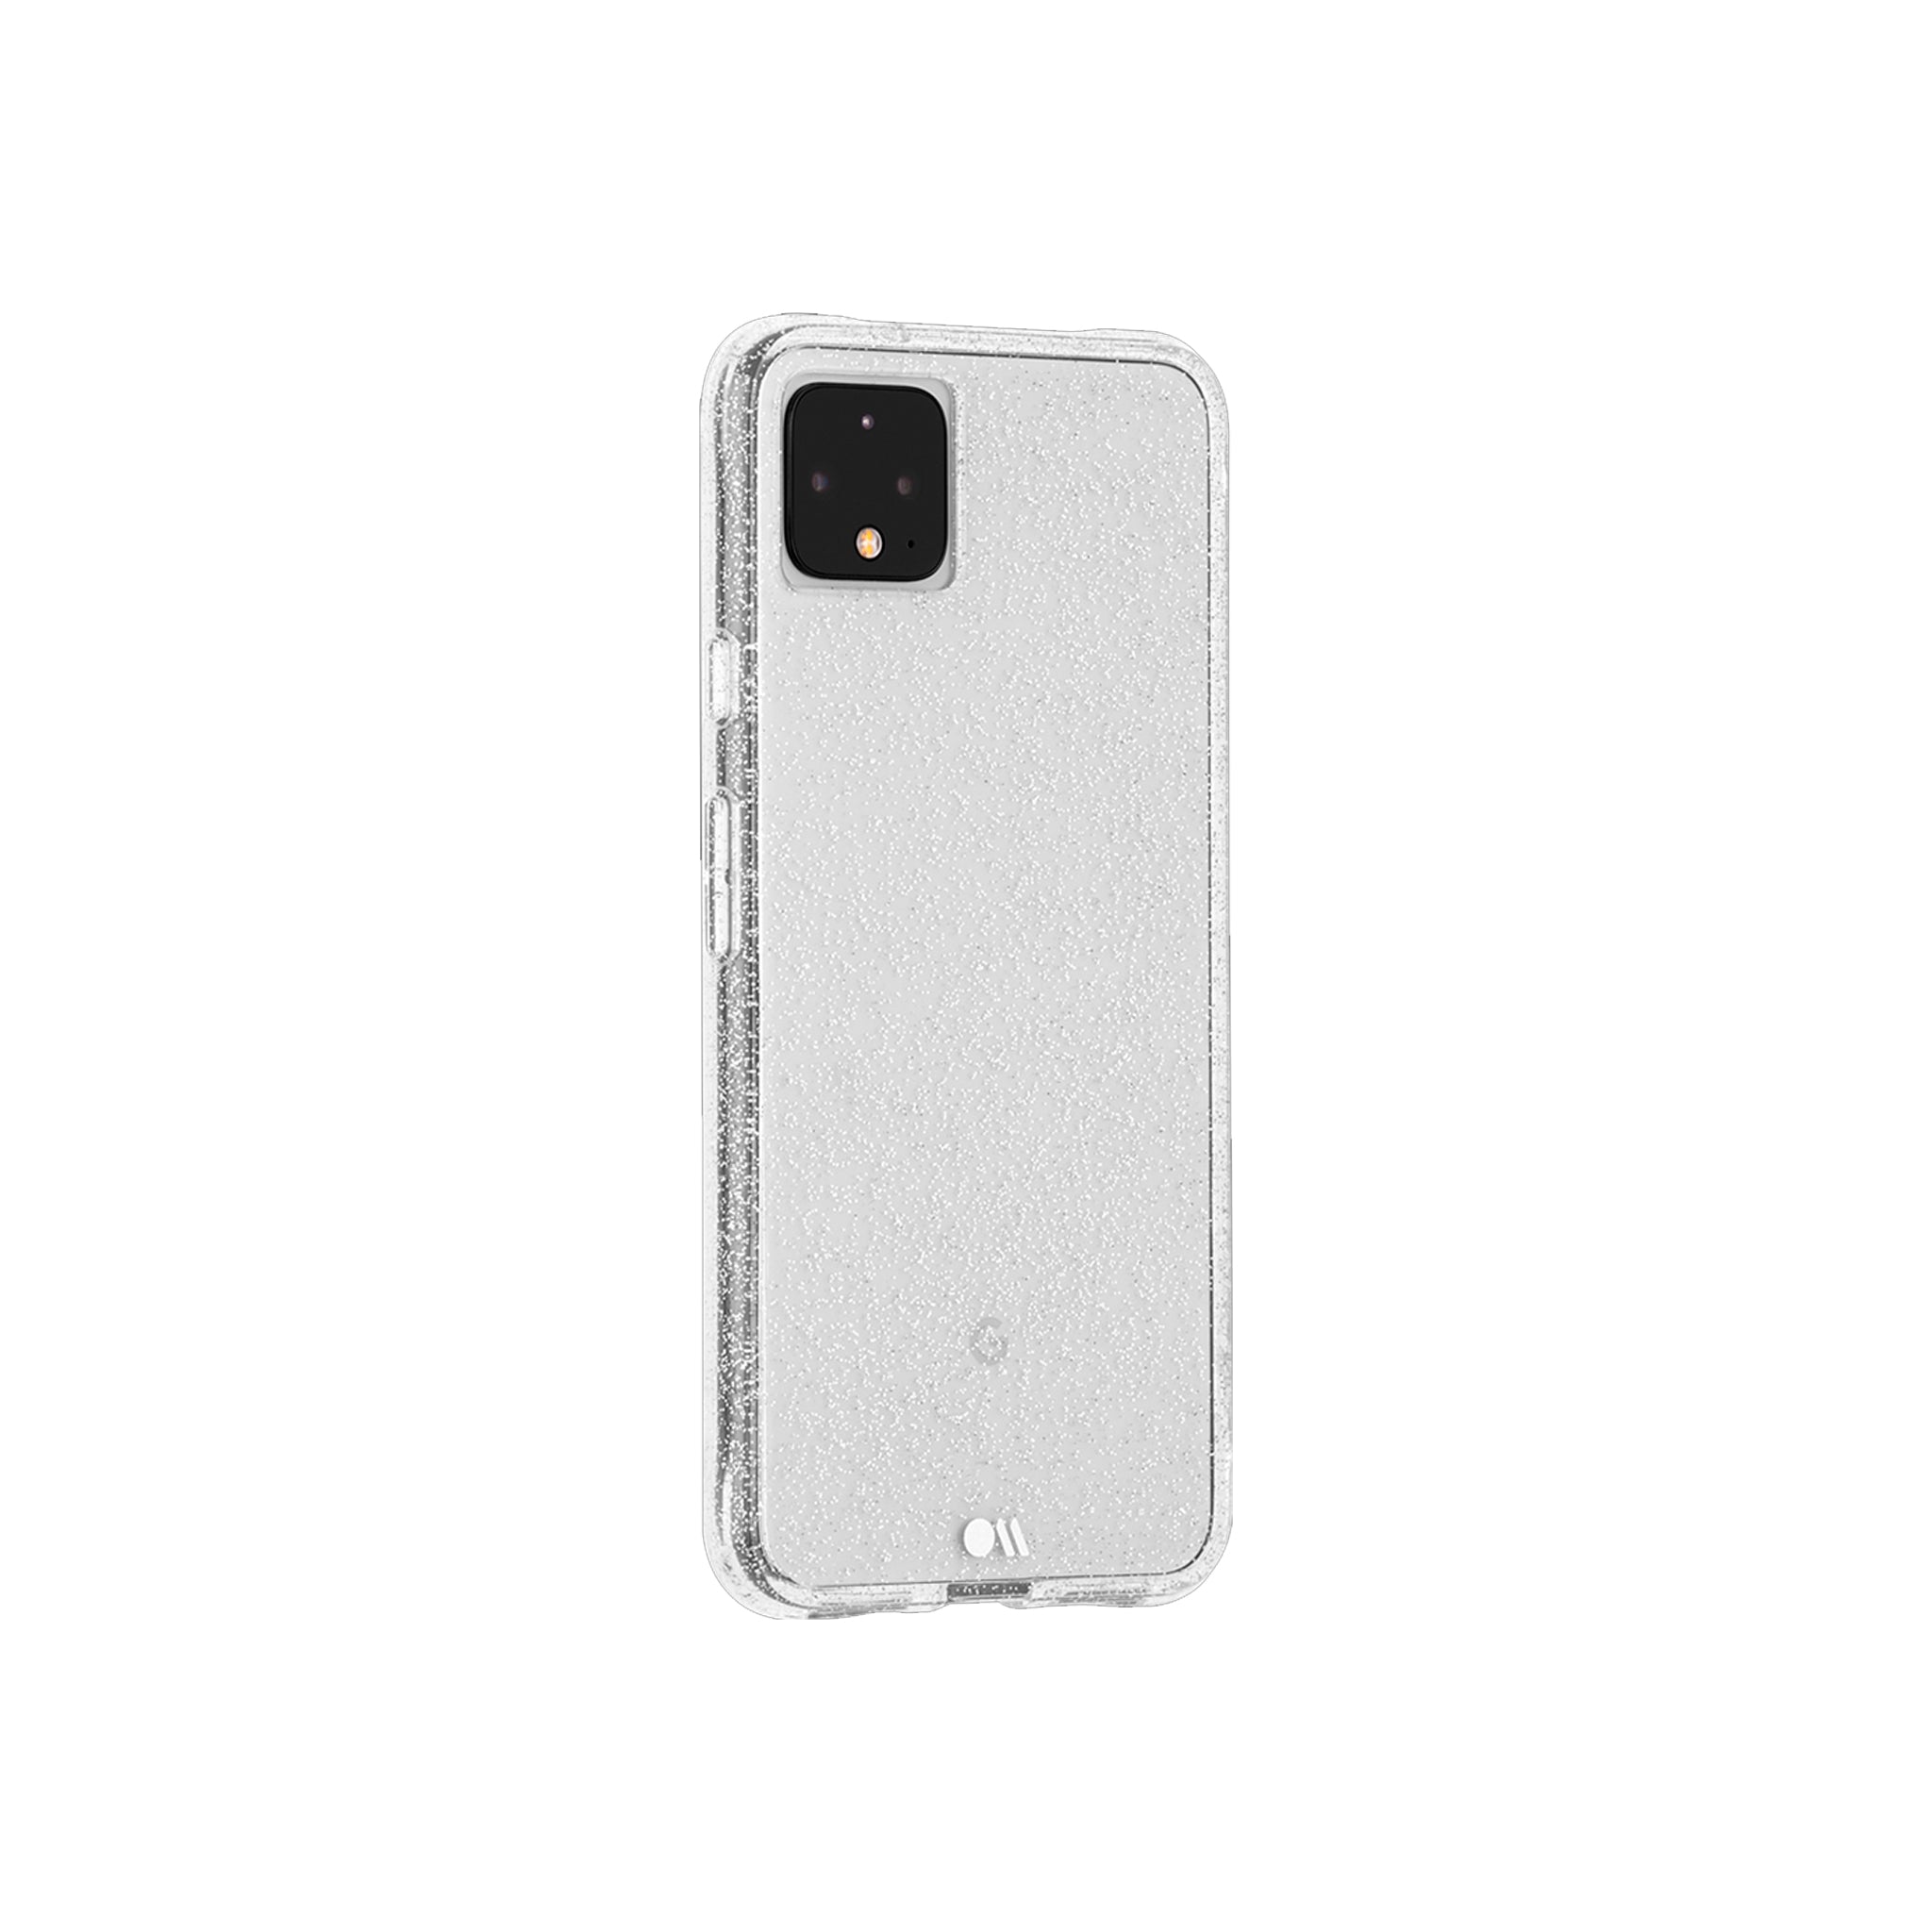 Case-mate - Sheer Crystal Case For Google Pixel 4 Xl - Clear